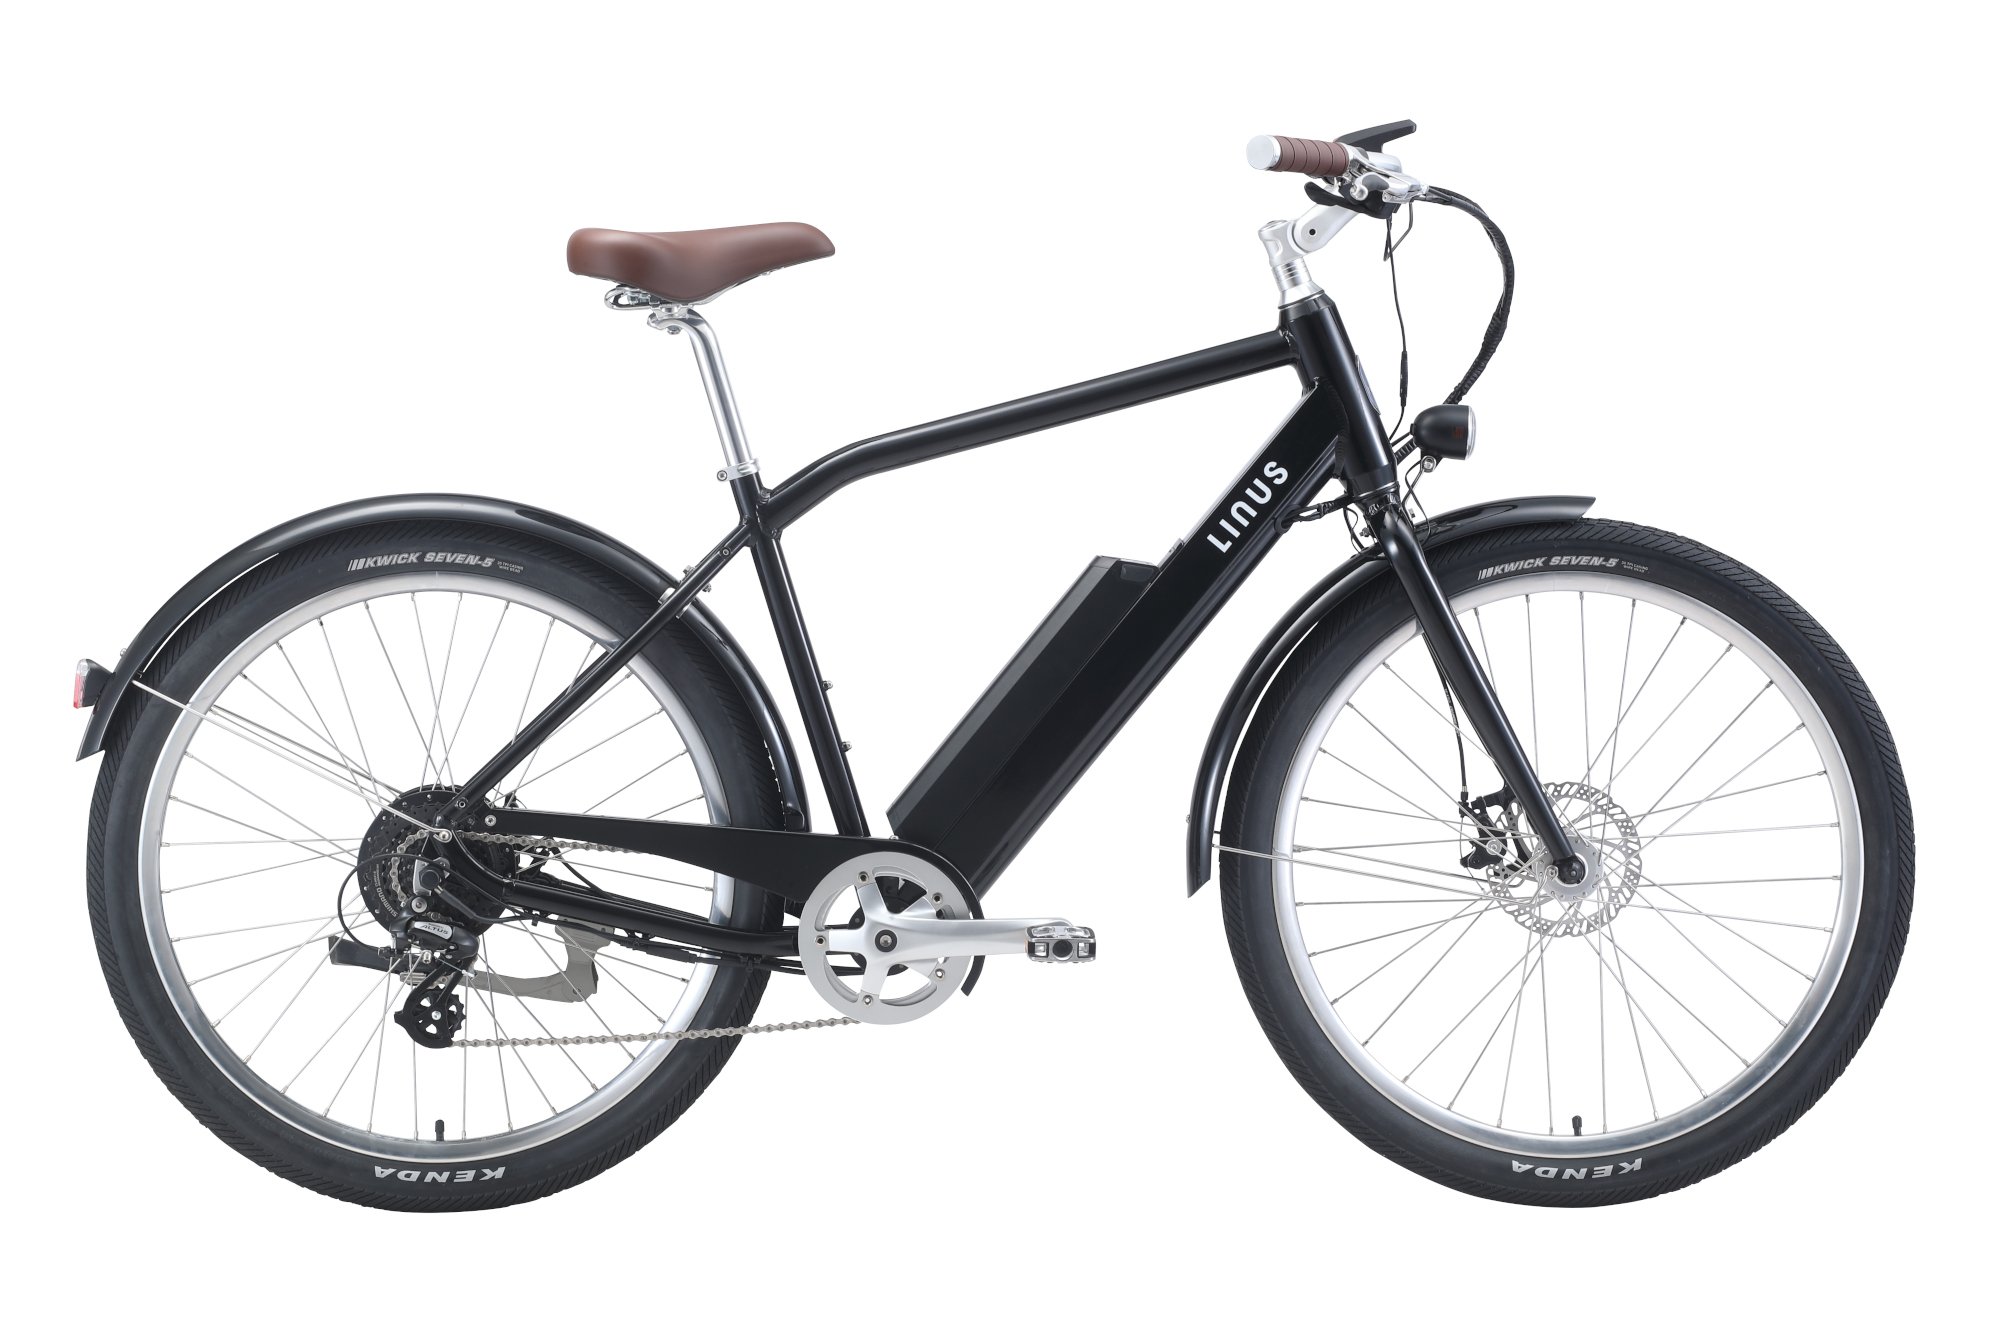 fashion-simplicity-and-affordability-traits-of-the-ero-500-e-bike-from-linus_8